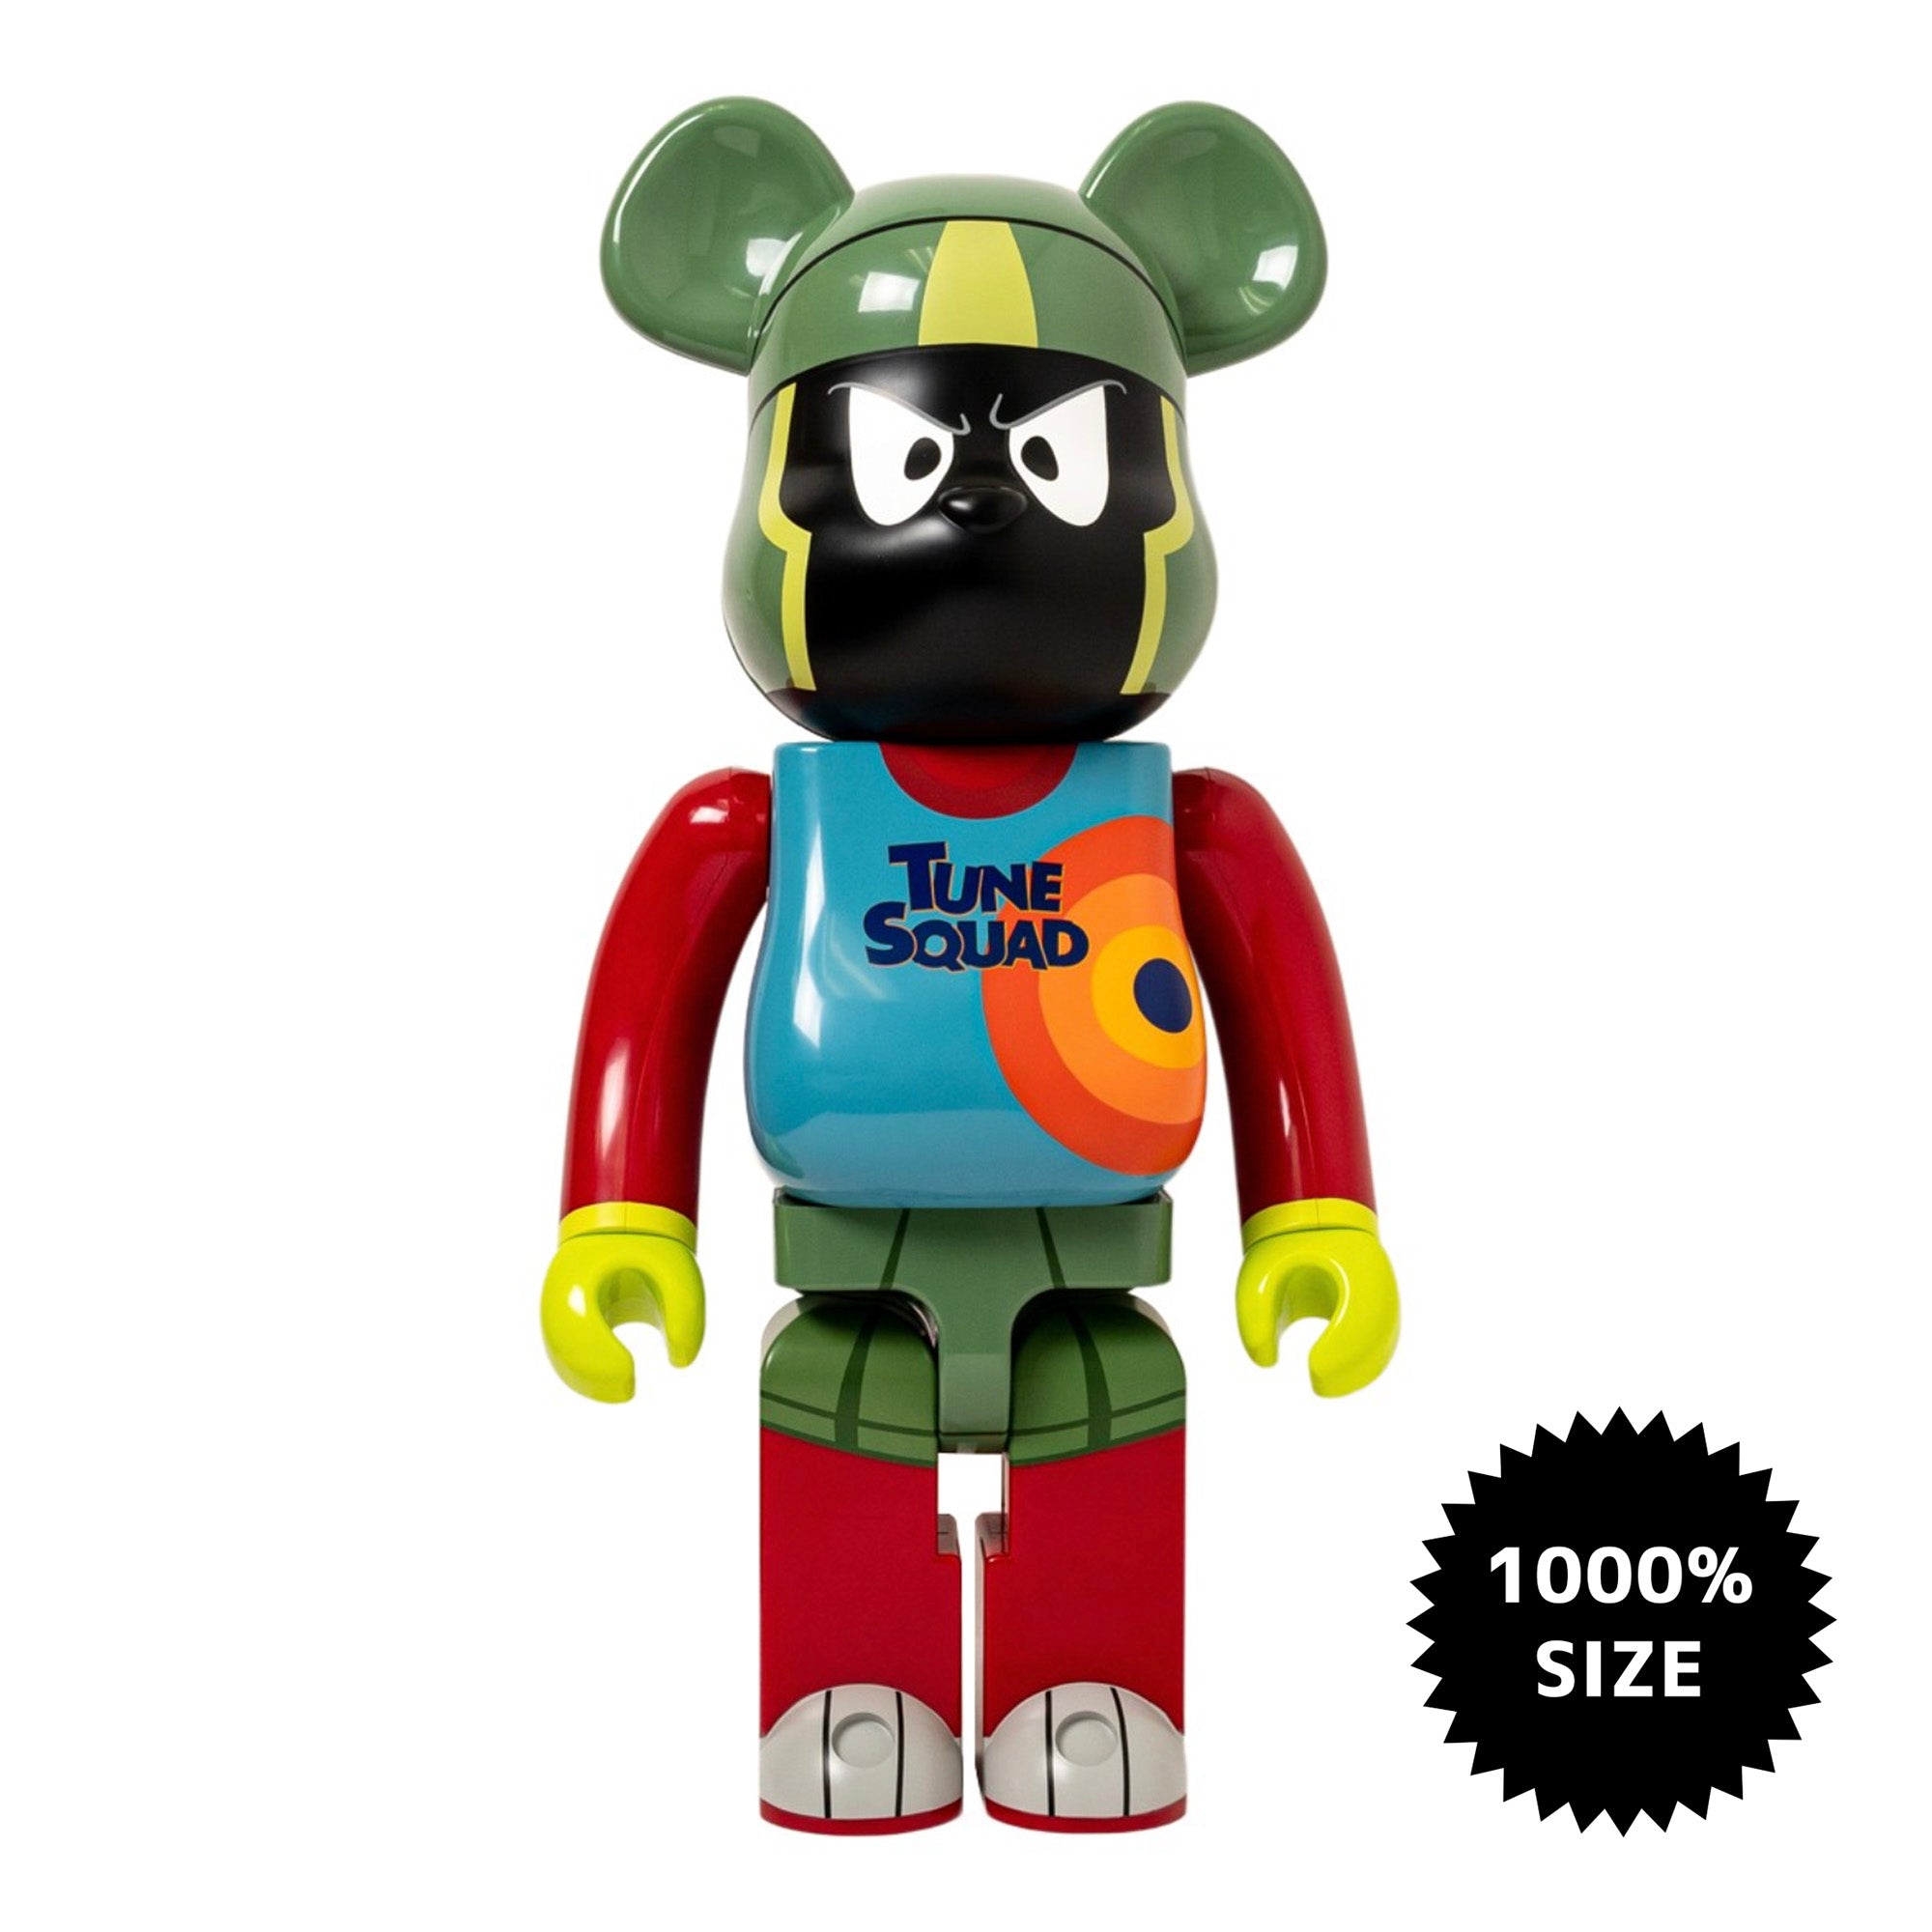 MEDICOM TOY: BE@RBRICK - Marvin The Martian Space Jam 1000% – TOY